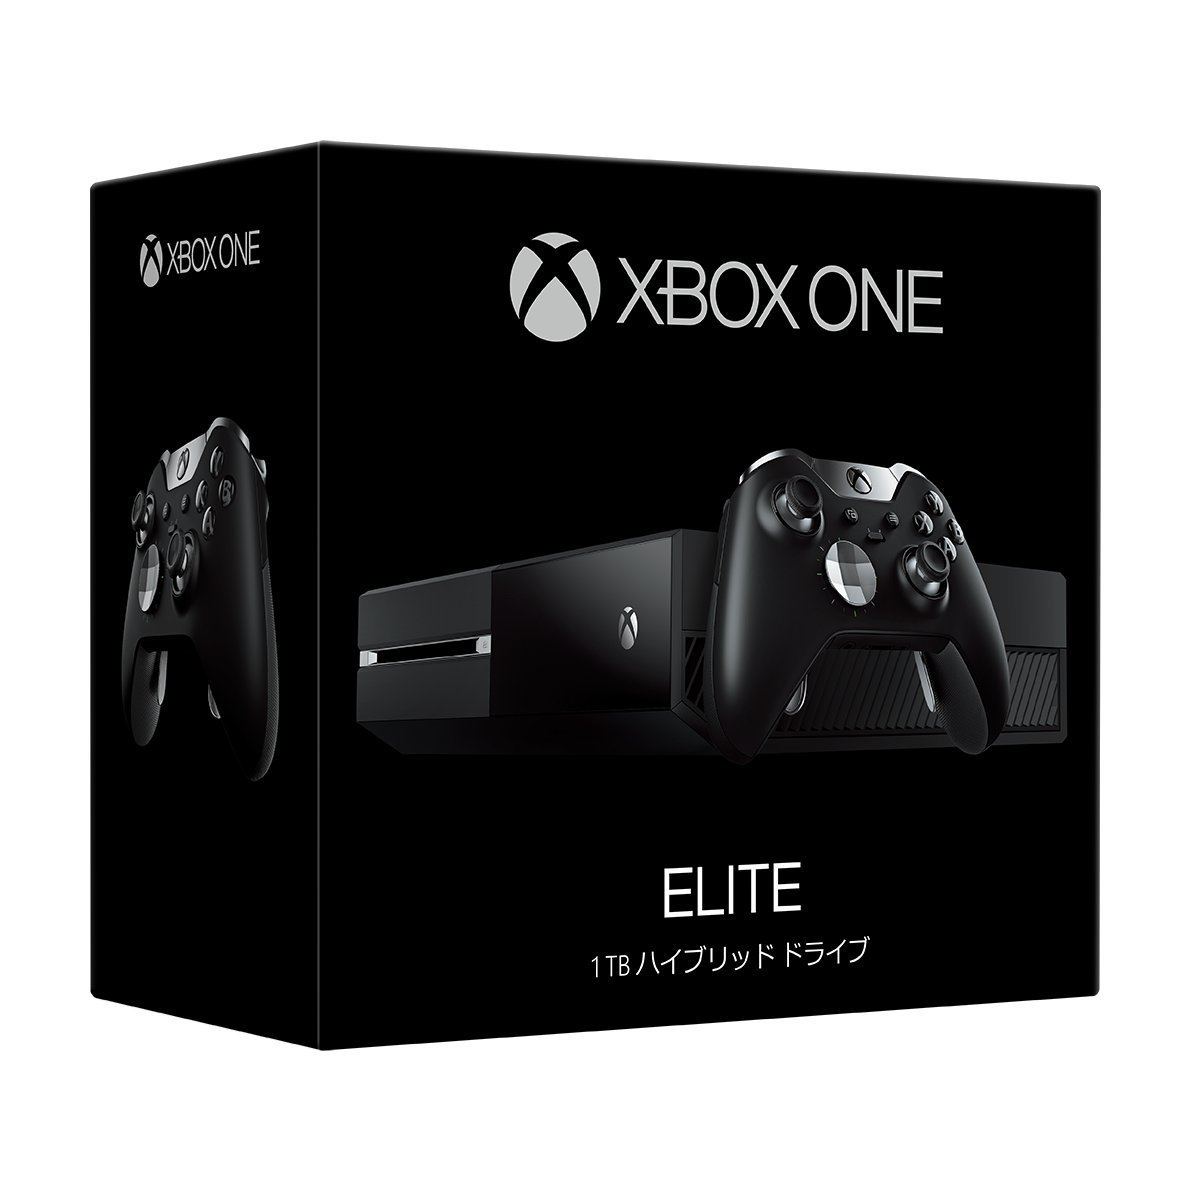 Xbox One Elite, 1TB Console System (Japan)